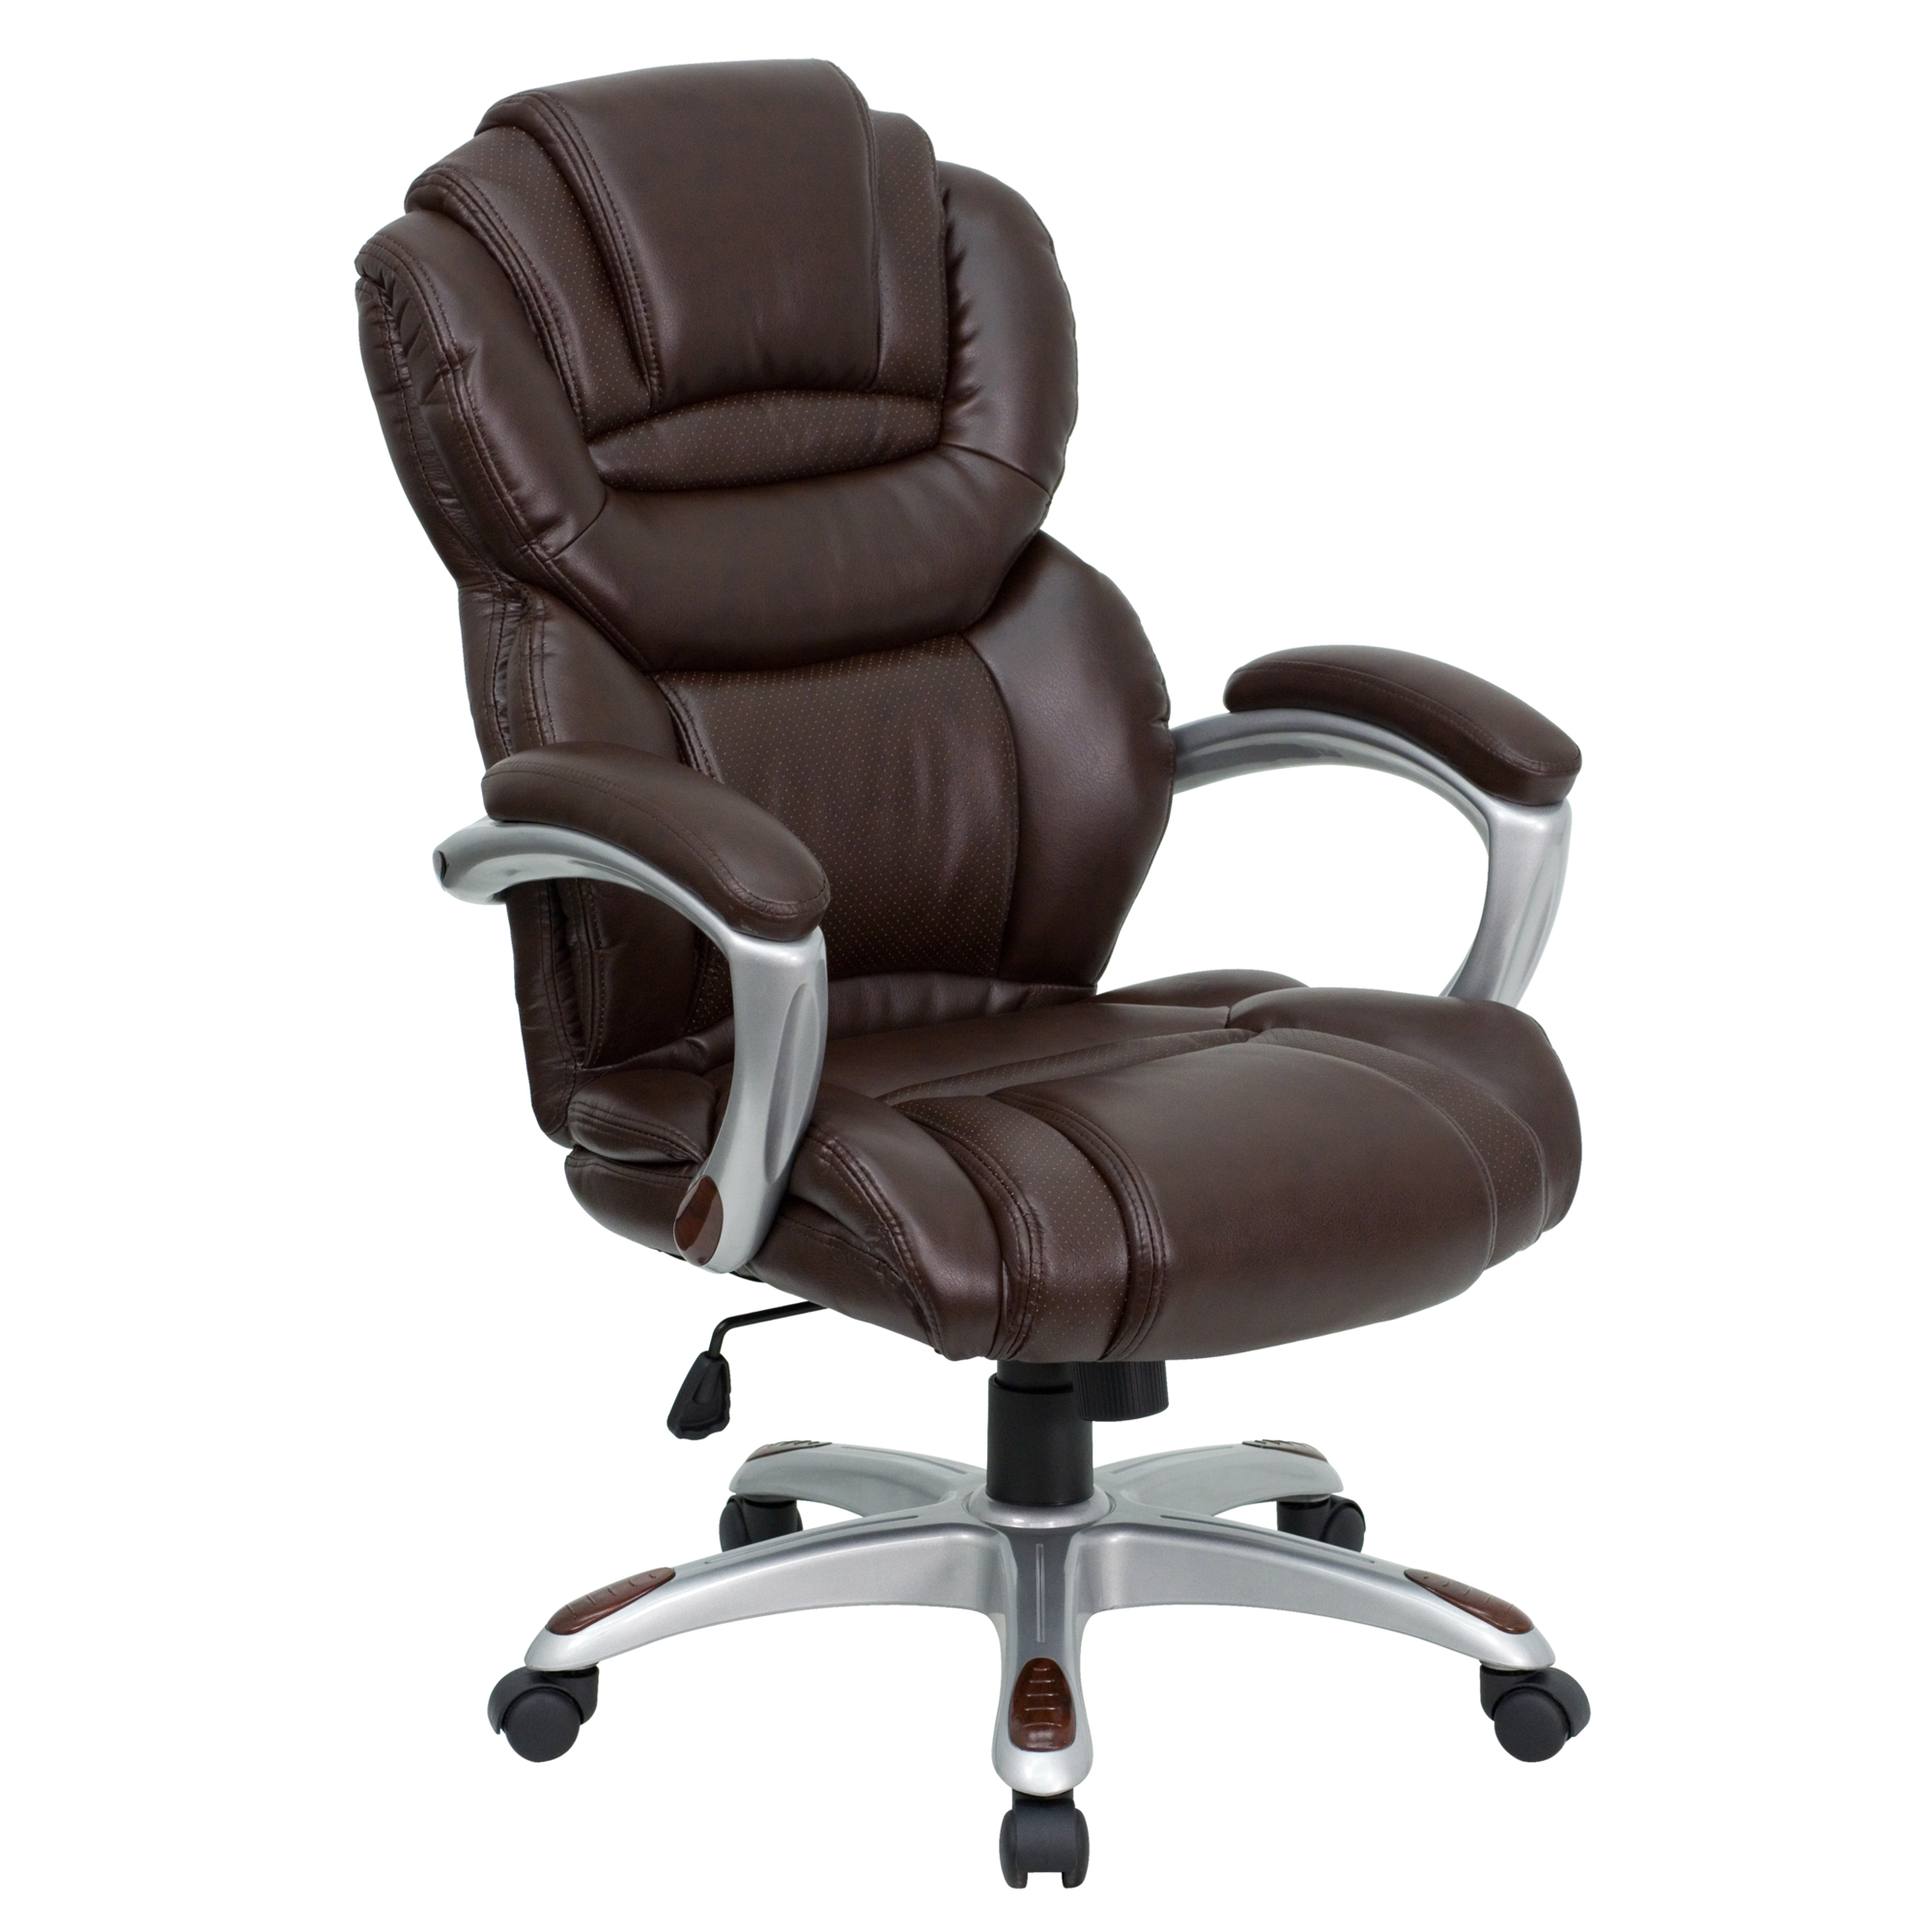 Flash Furniture, High Back Brown LeatherSoft Swivel Office Chair, Primary Color Brown, Included (qty.) 1, Model GO901BN